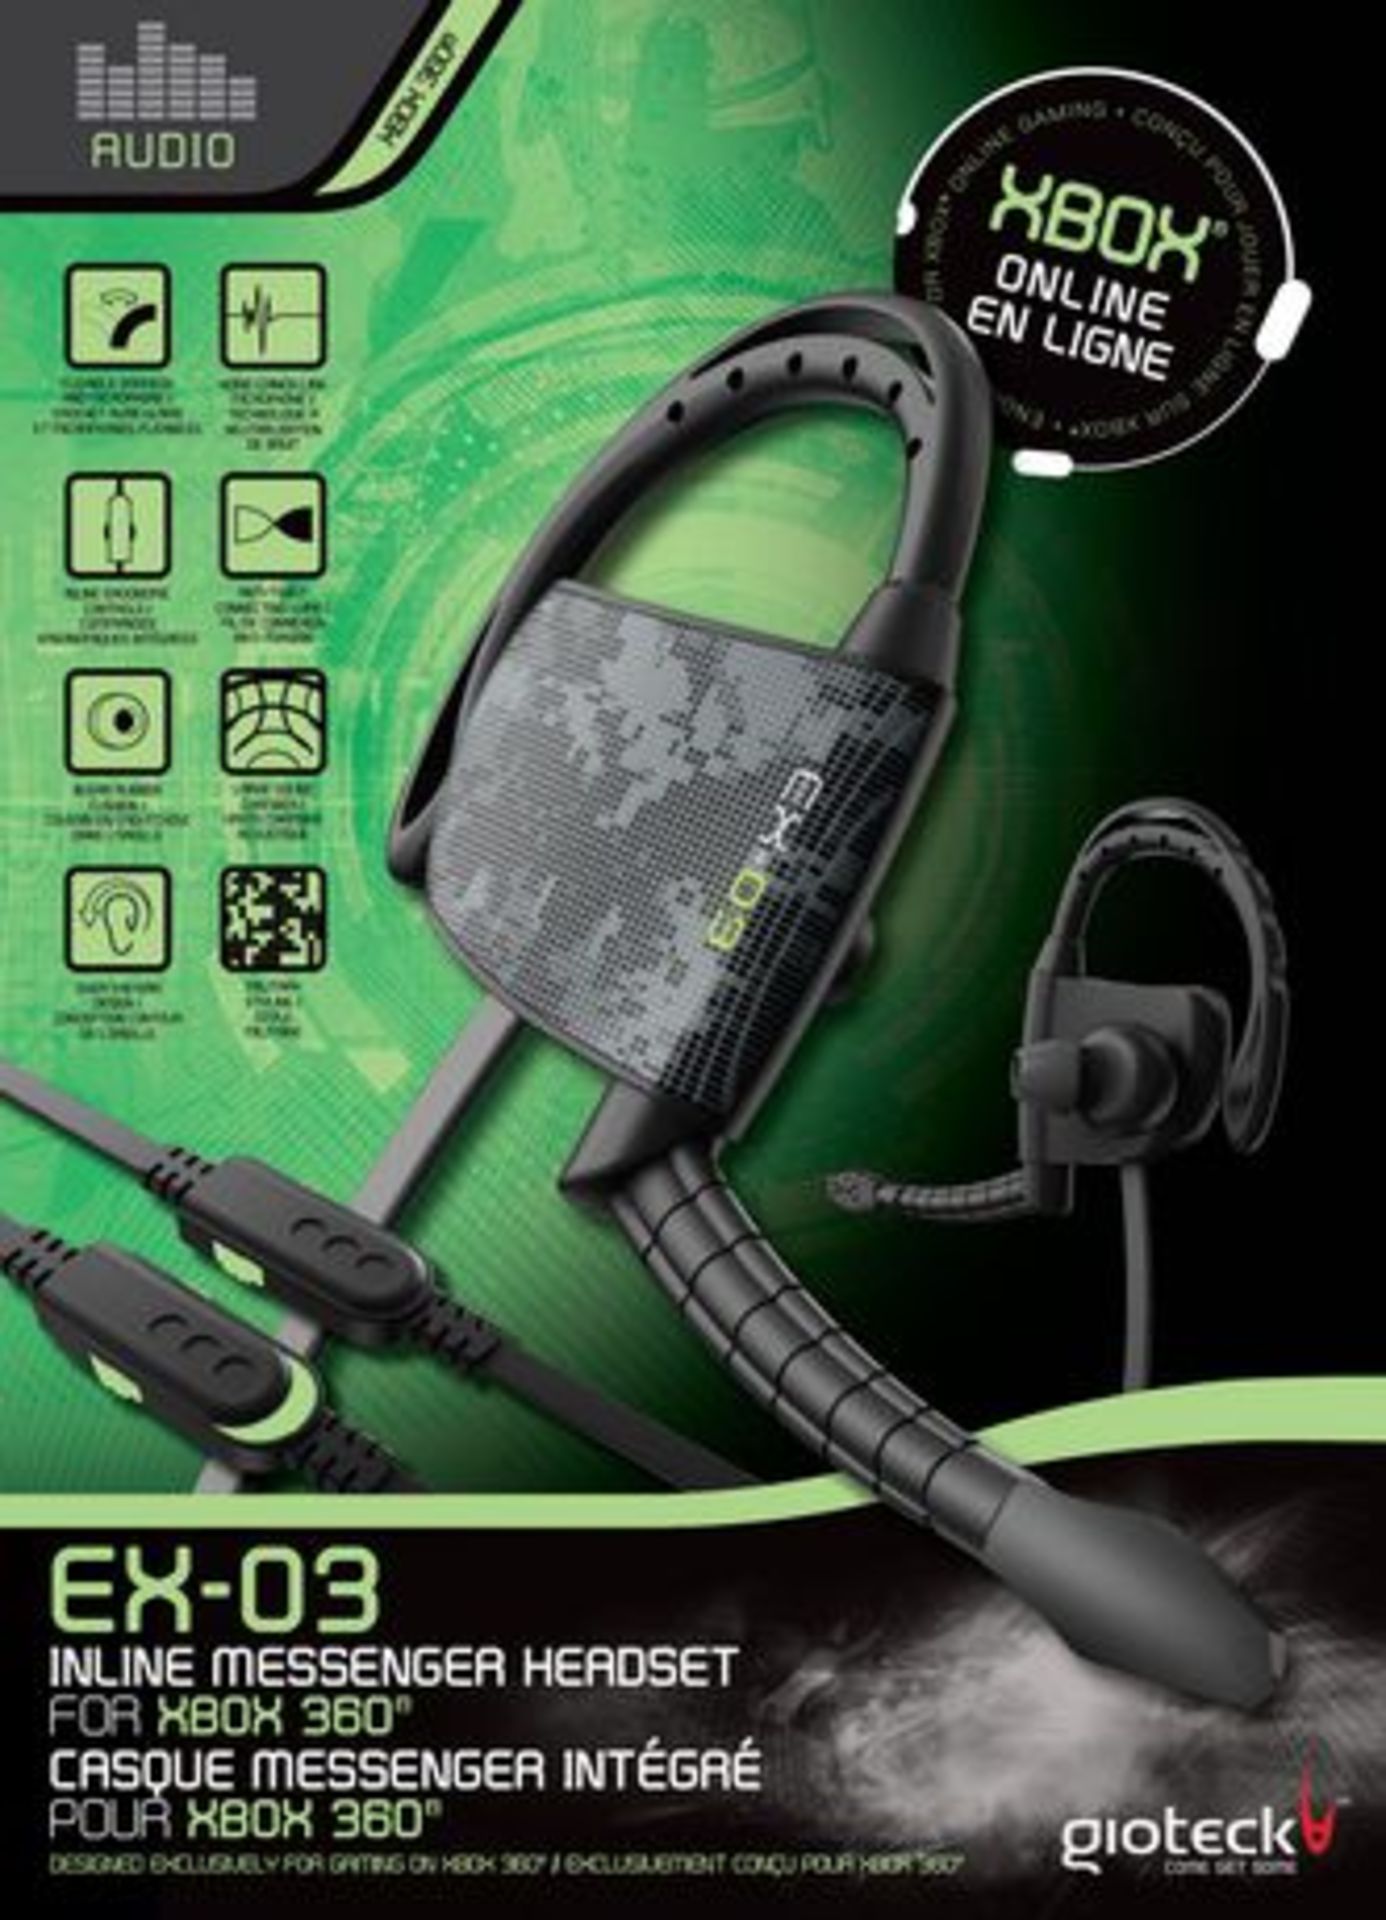 V *TRADE QTY* Brand New Gioteck Ex-03 Online Messenger Headset For Xbox 360 X 5 YOUR BID PRICE TO BE